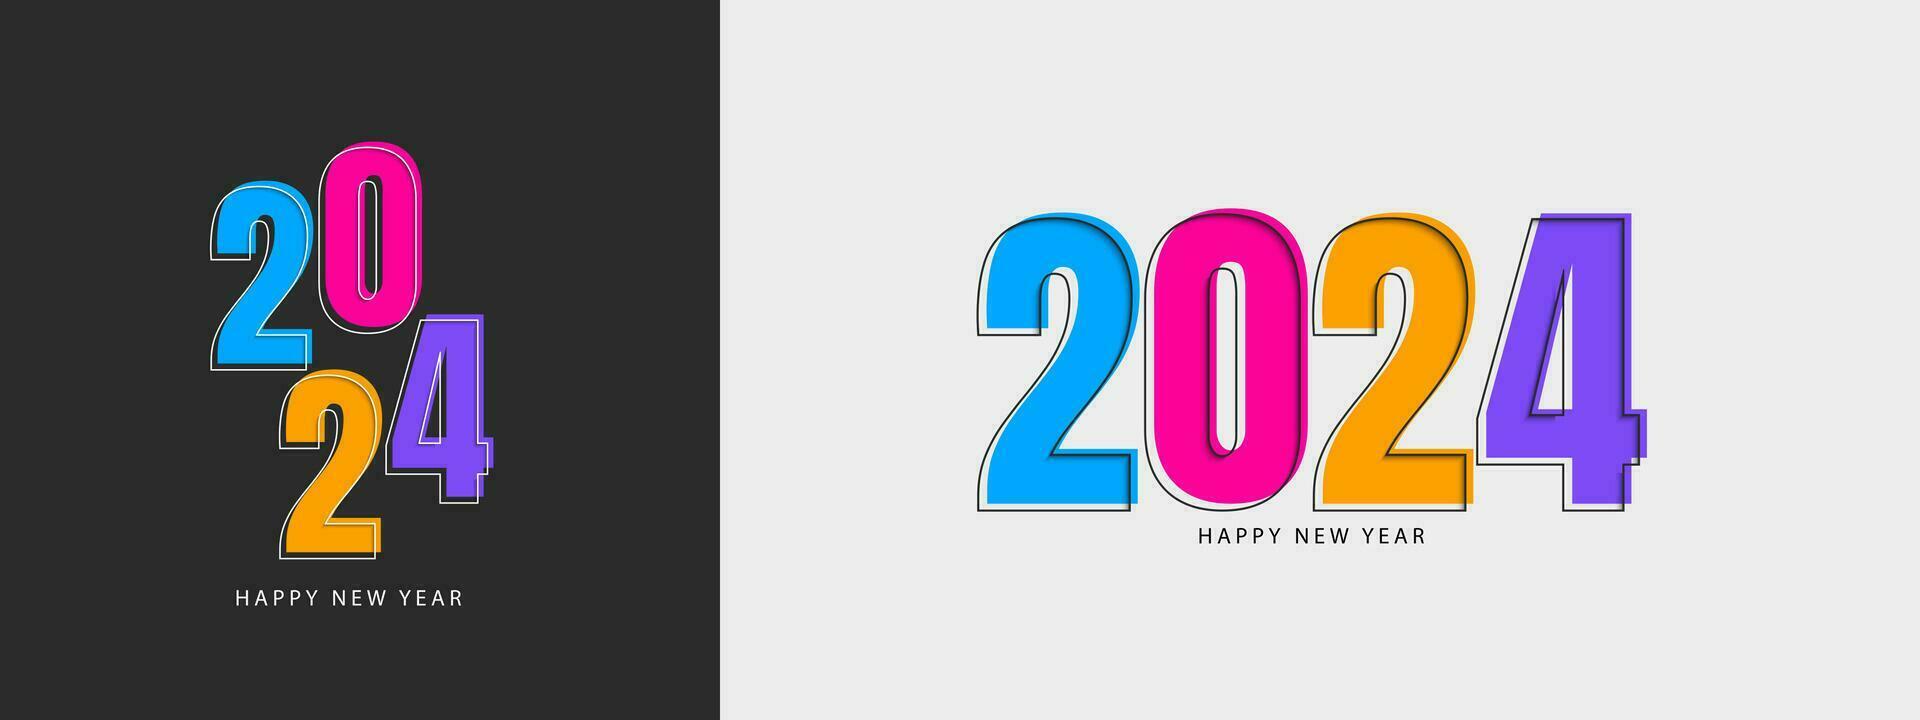 Happy new year 2024 design. Trendy number illustration design. Vector template for banner, poster, greeting and new year 2024 celebration